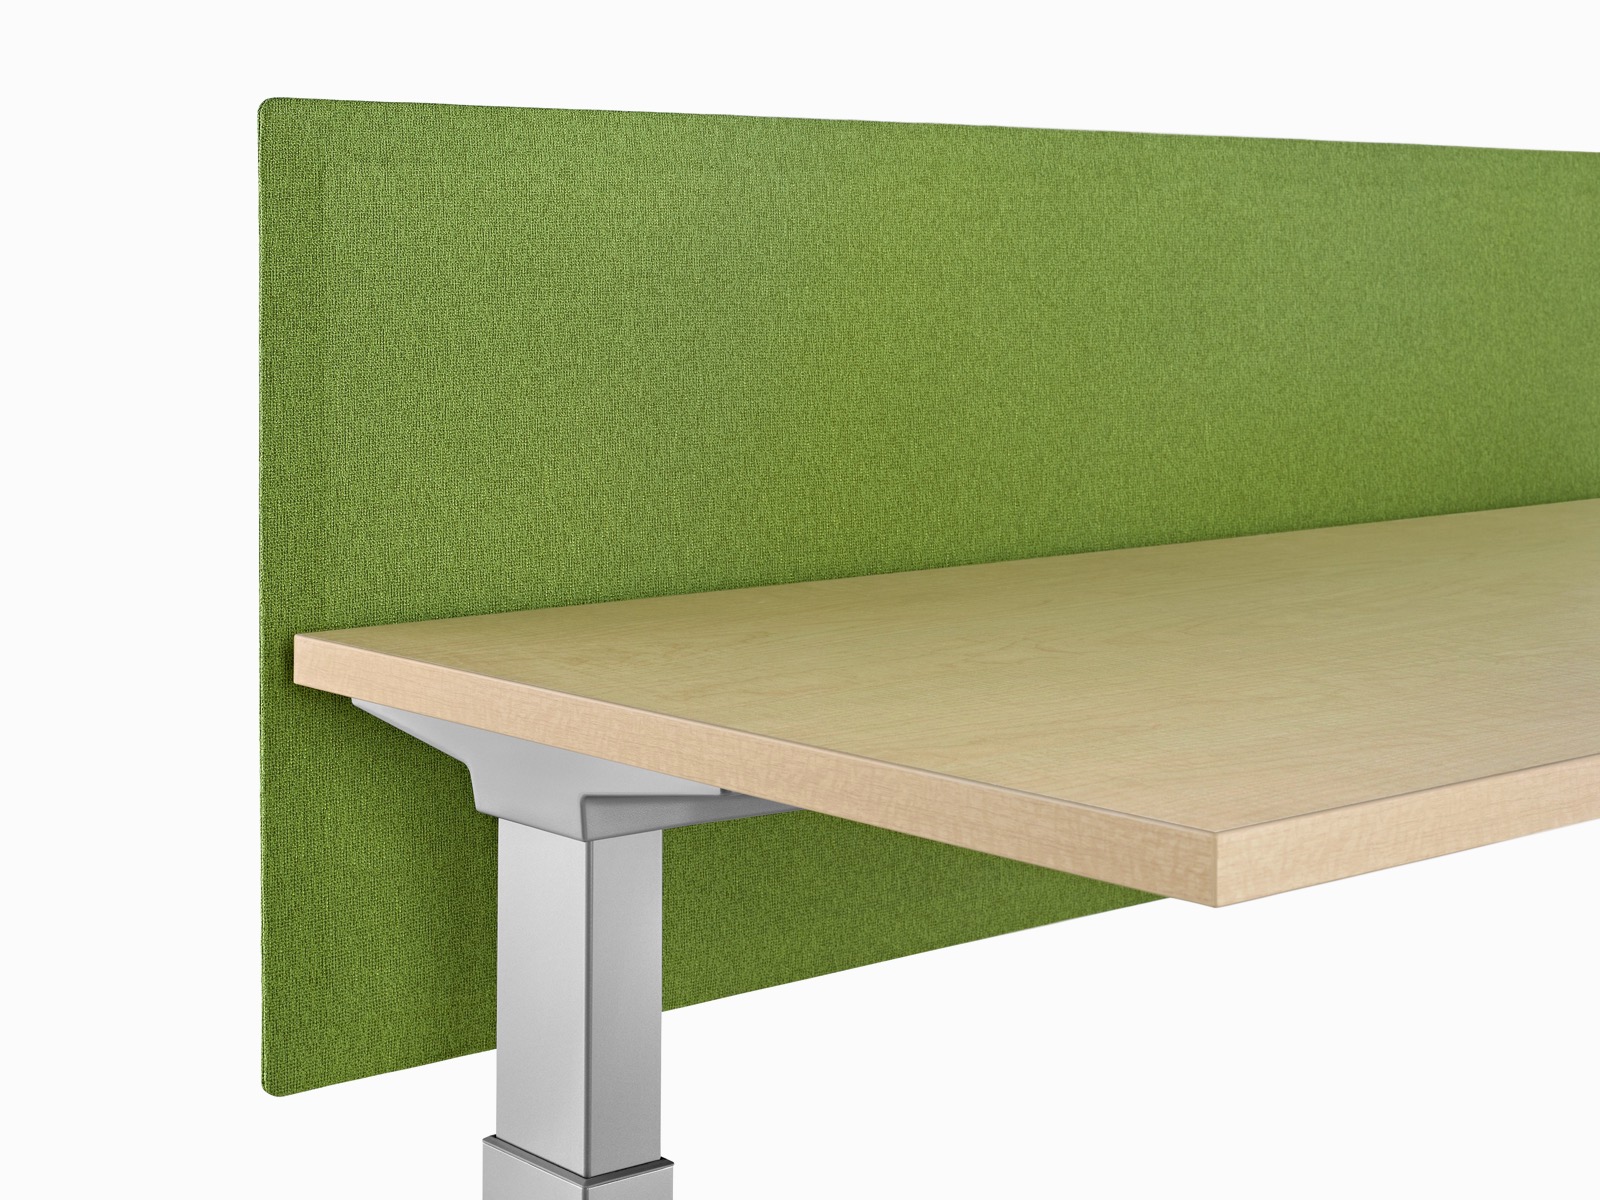 https://www.hermanmiller.com/content/dam/hmicom/page_assets/products/renew_sit_to_stand_tables_screens/it_prd_ovw_renew_sit_to_stand_tables_screens_01.jpg